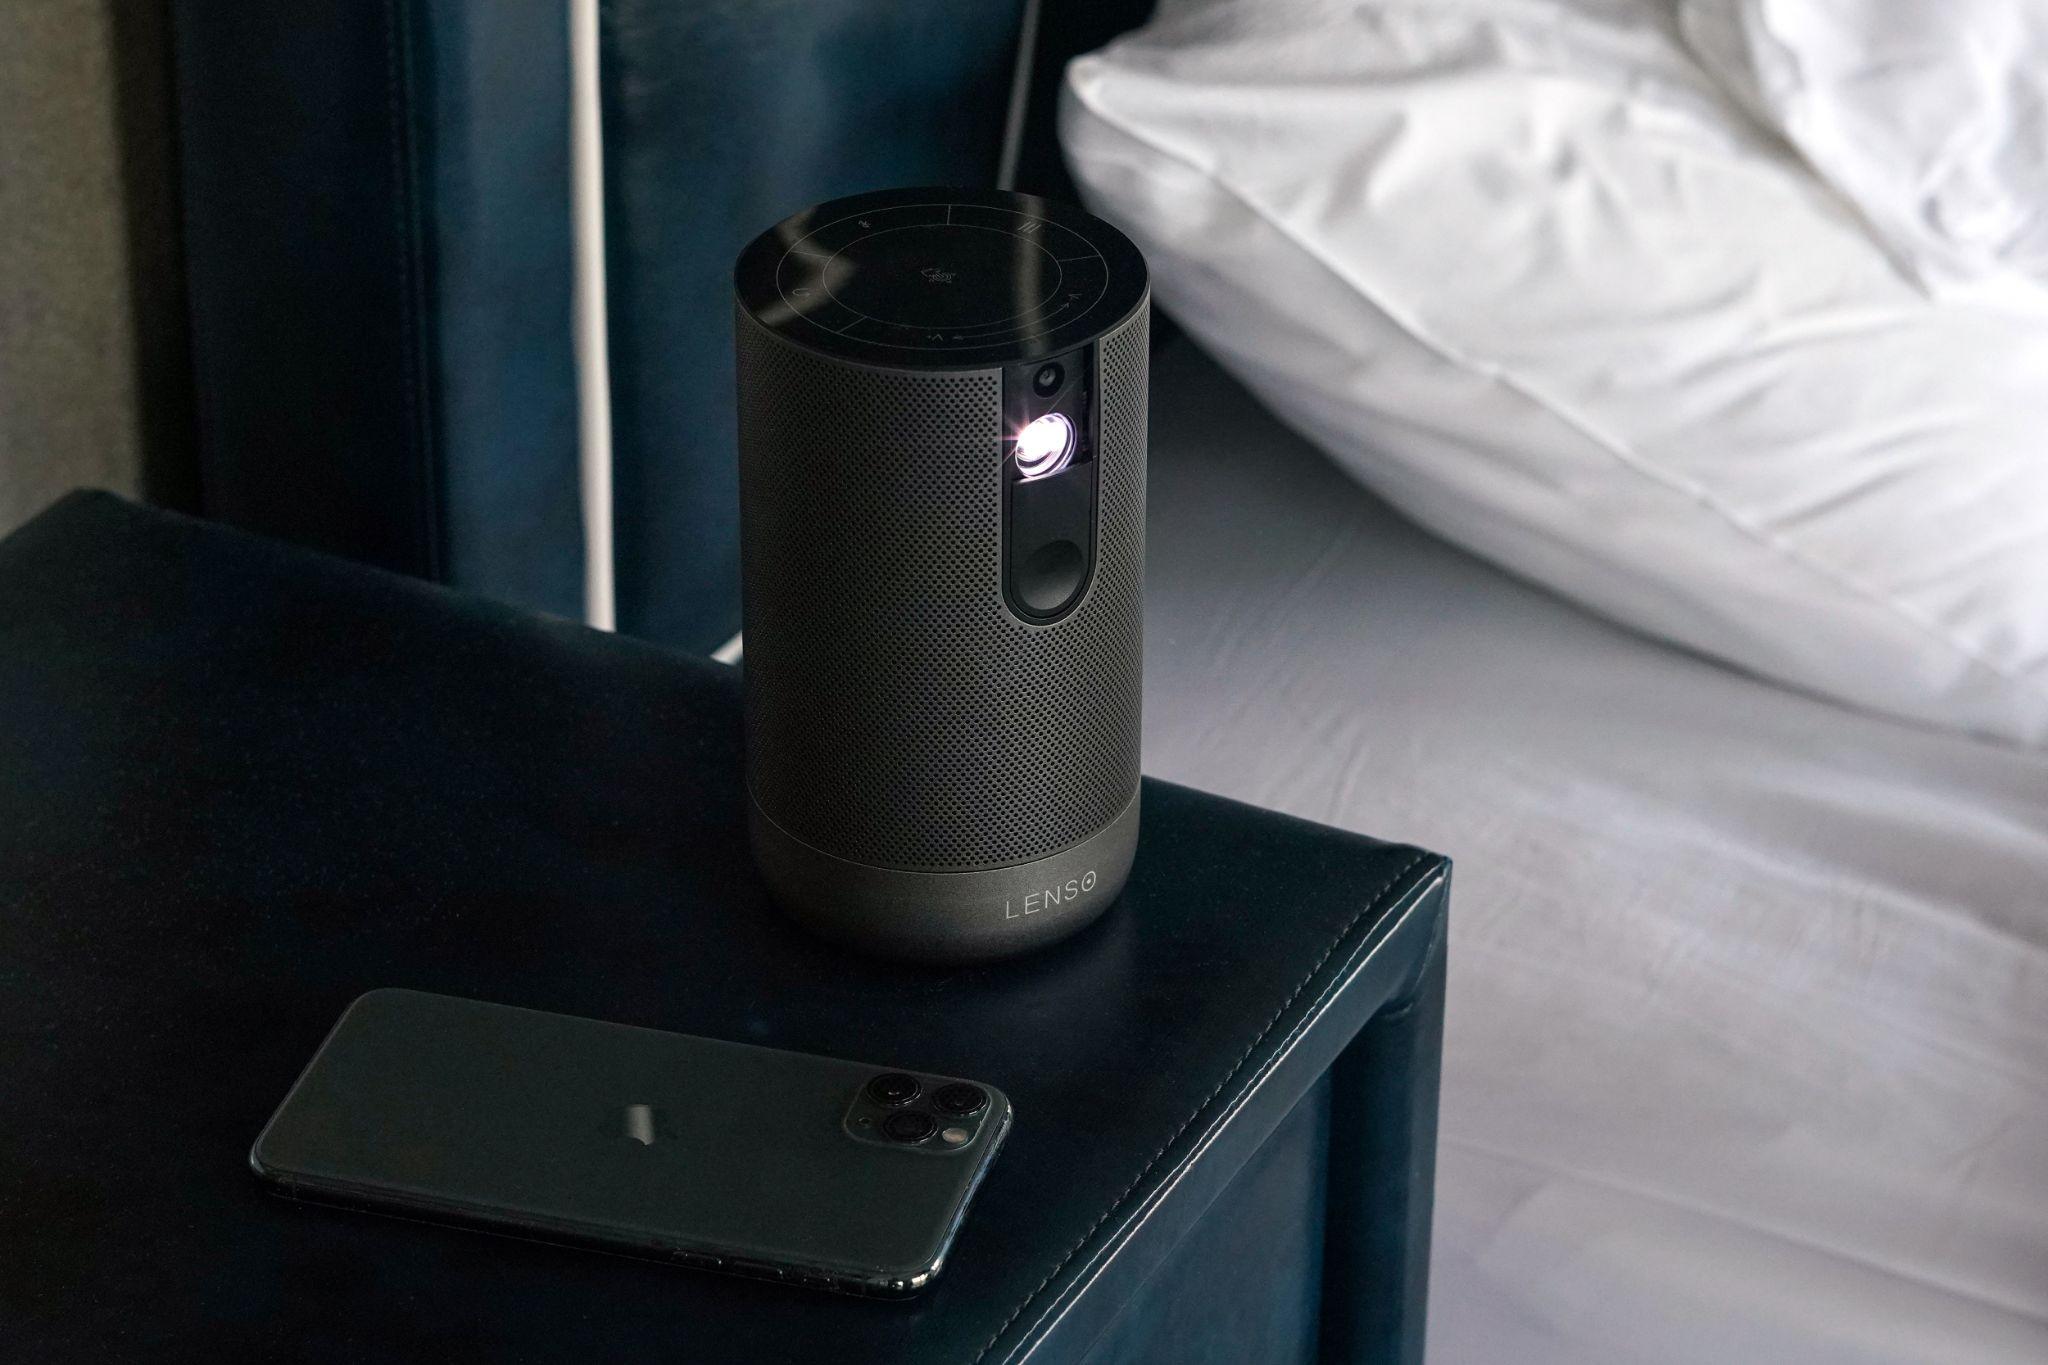 Set up a Portable Projector at your bedside table